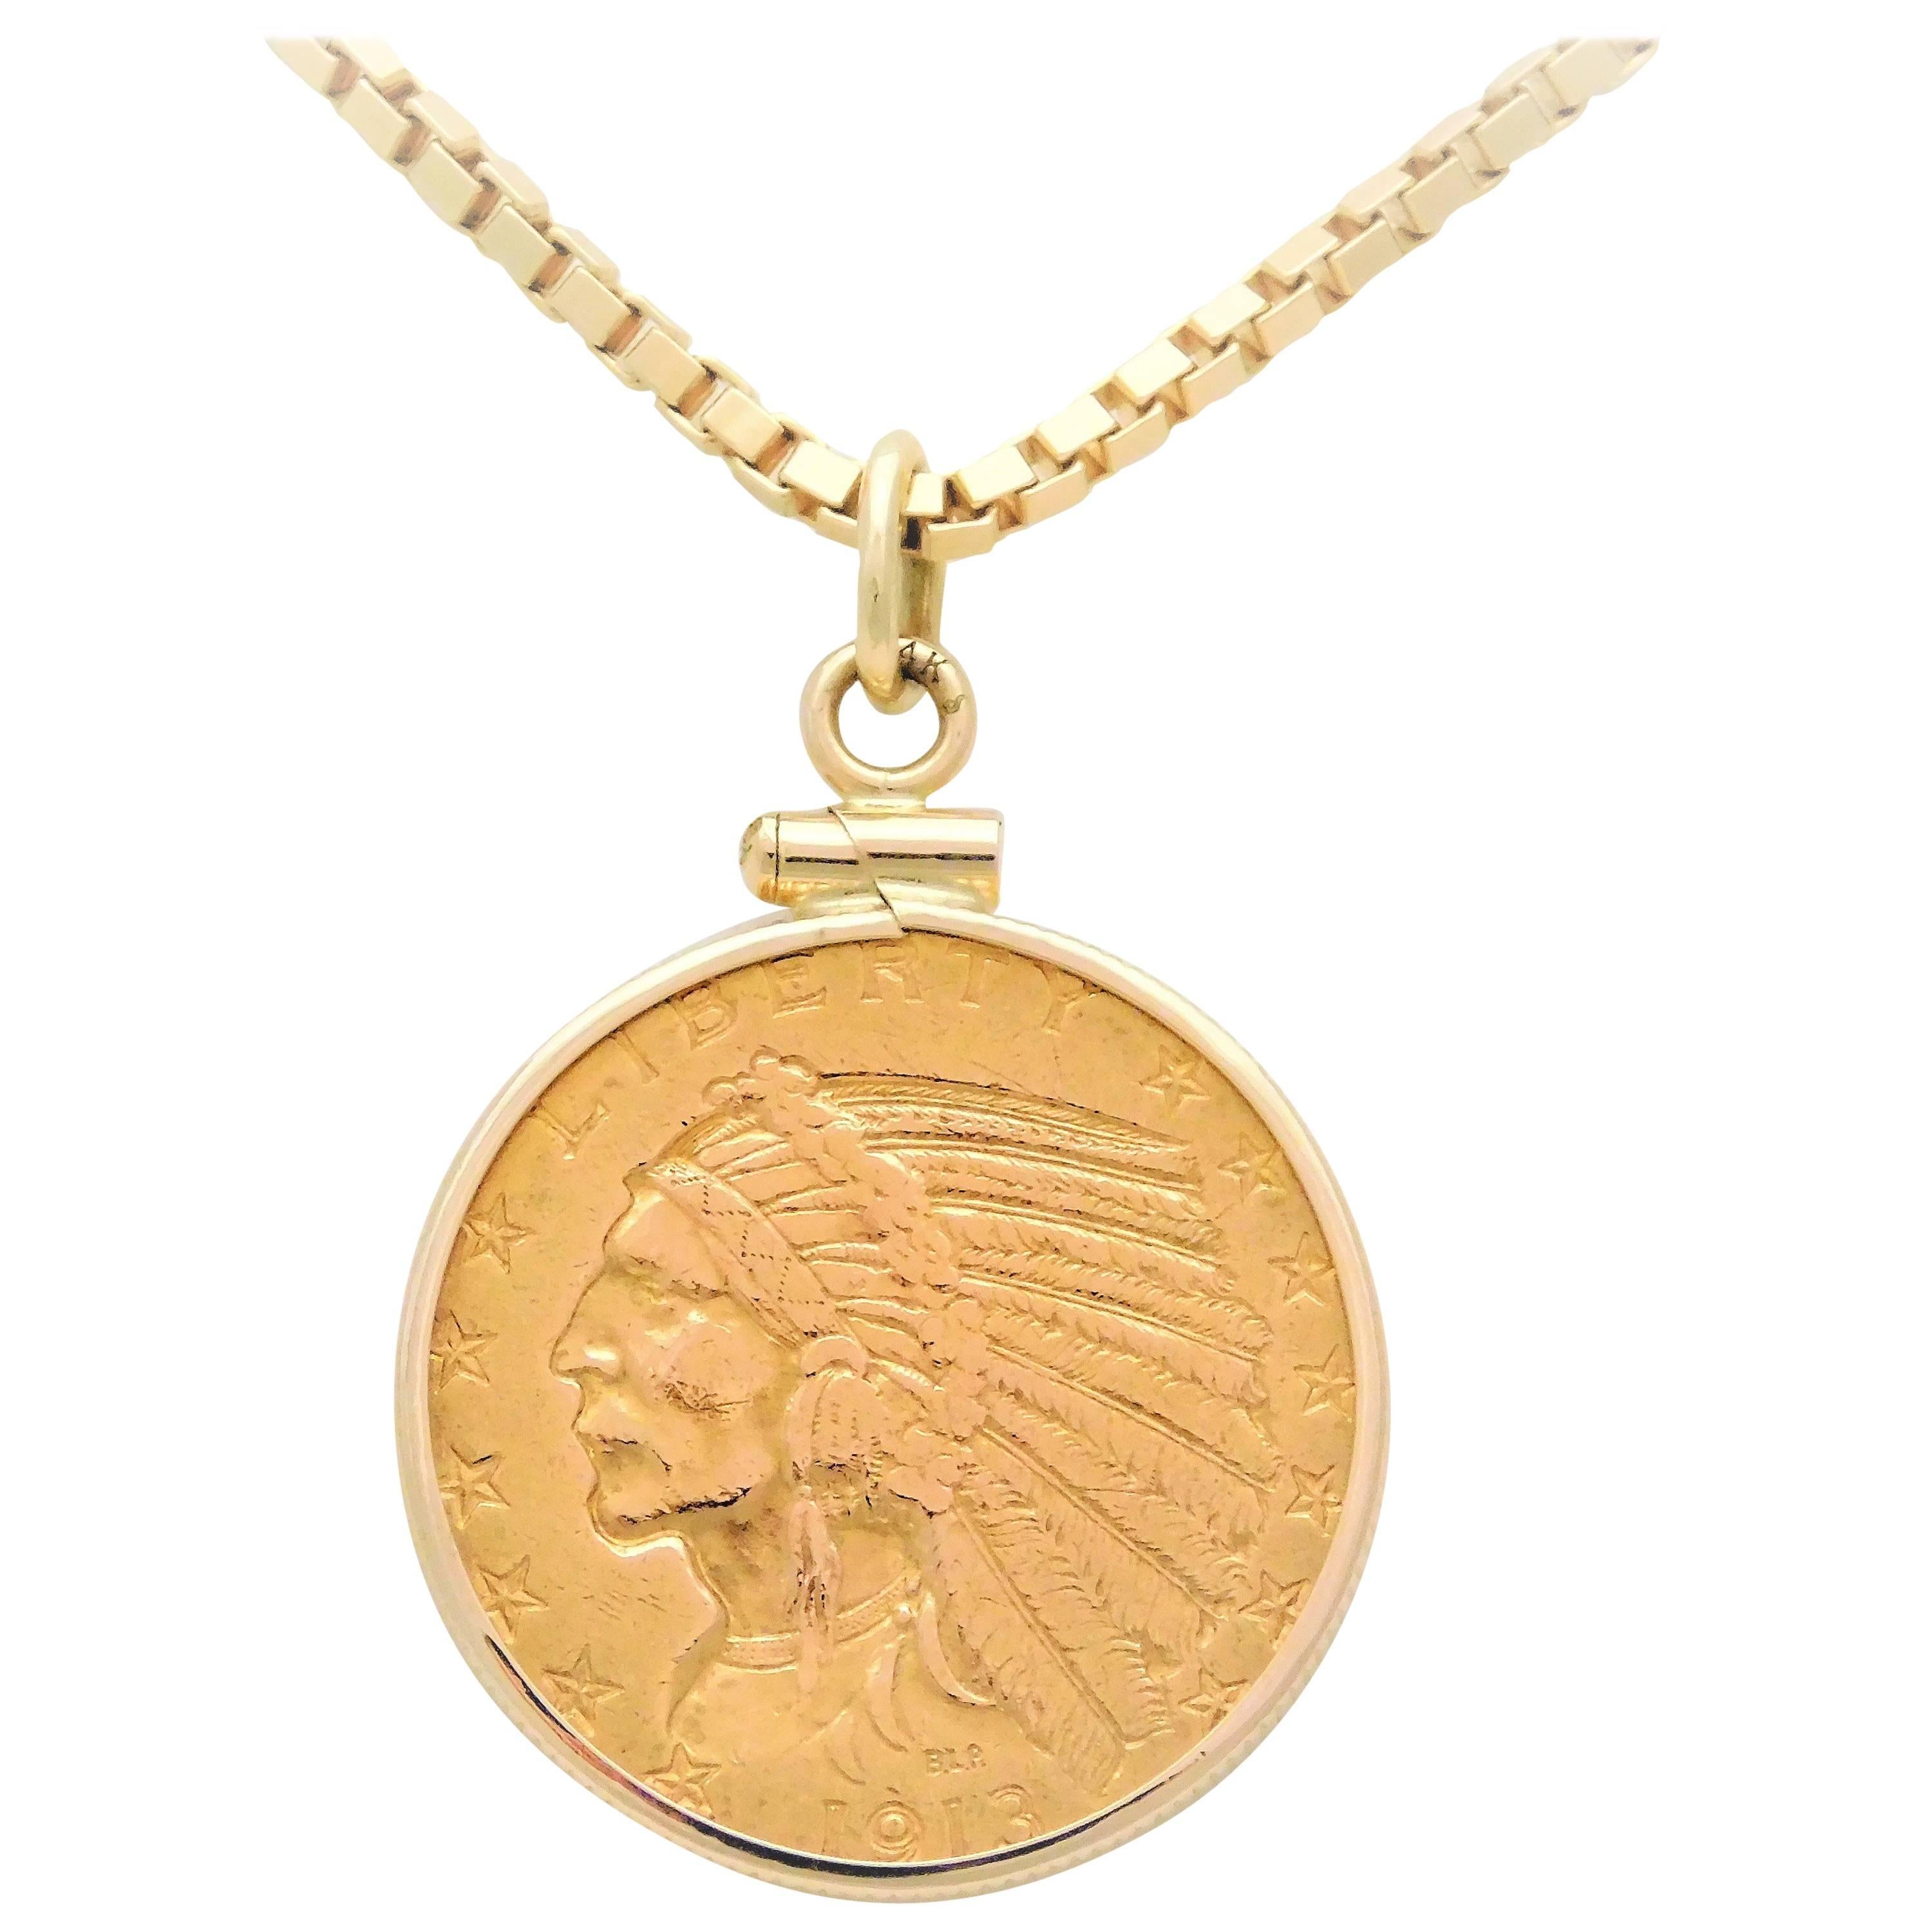 US 1913 $5 Indian Head Coin Pendant Necklace